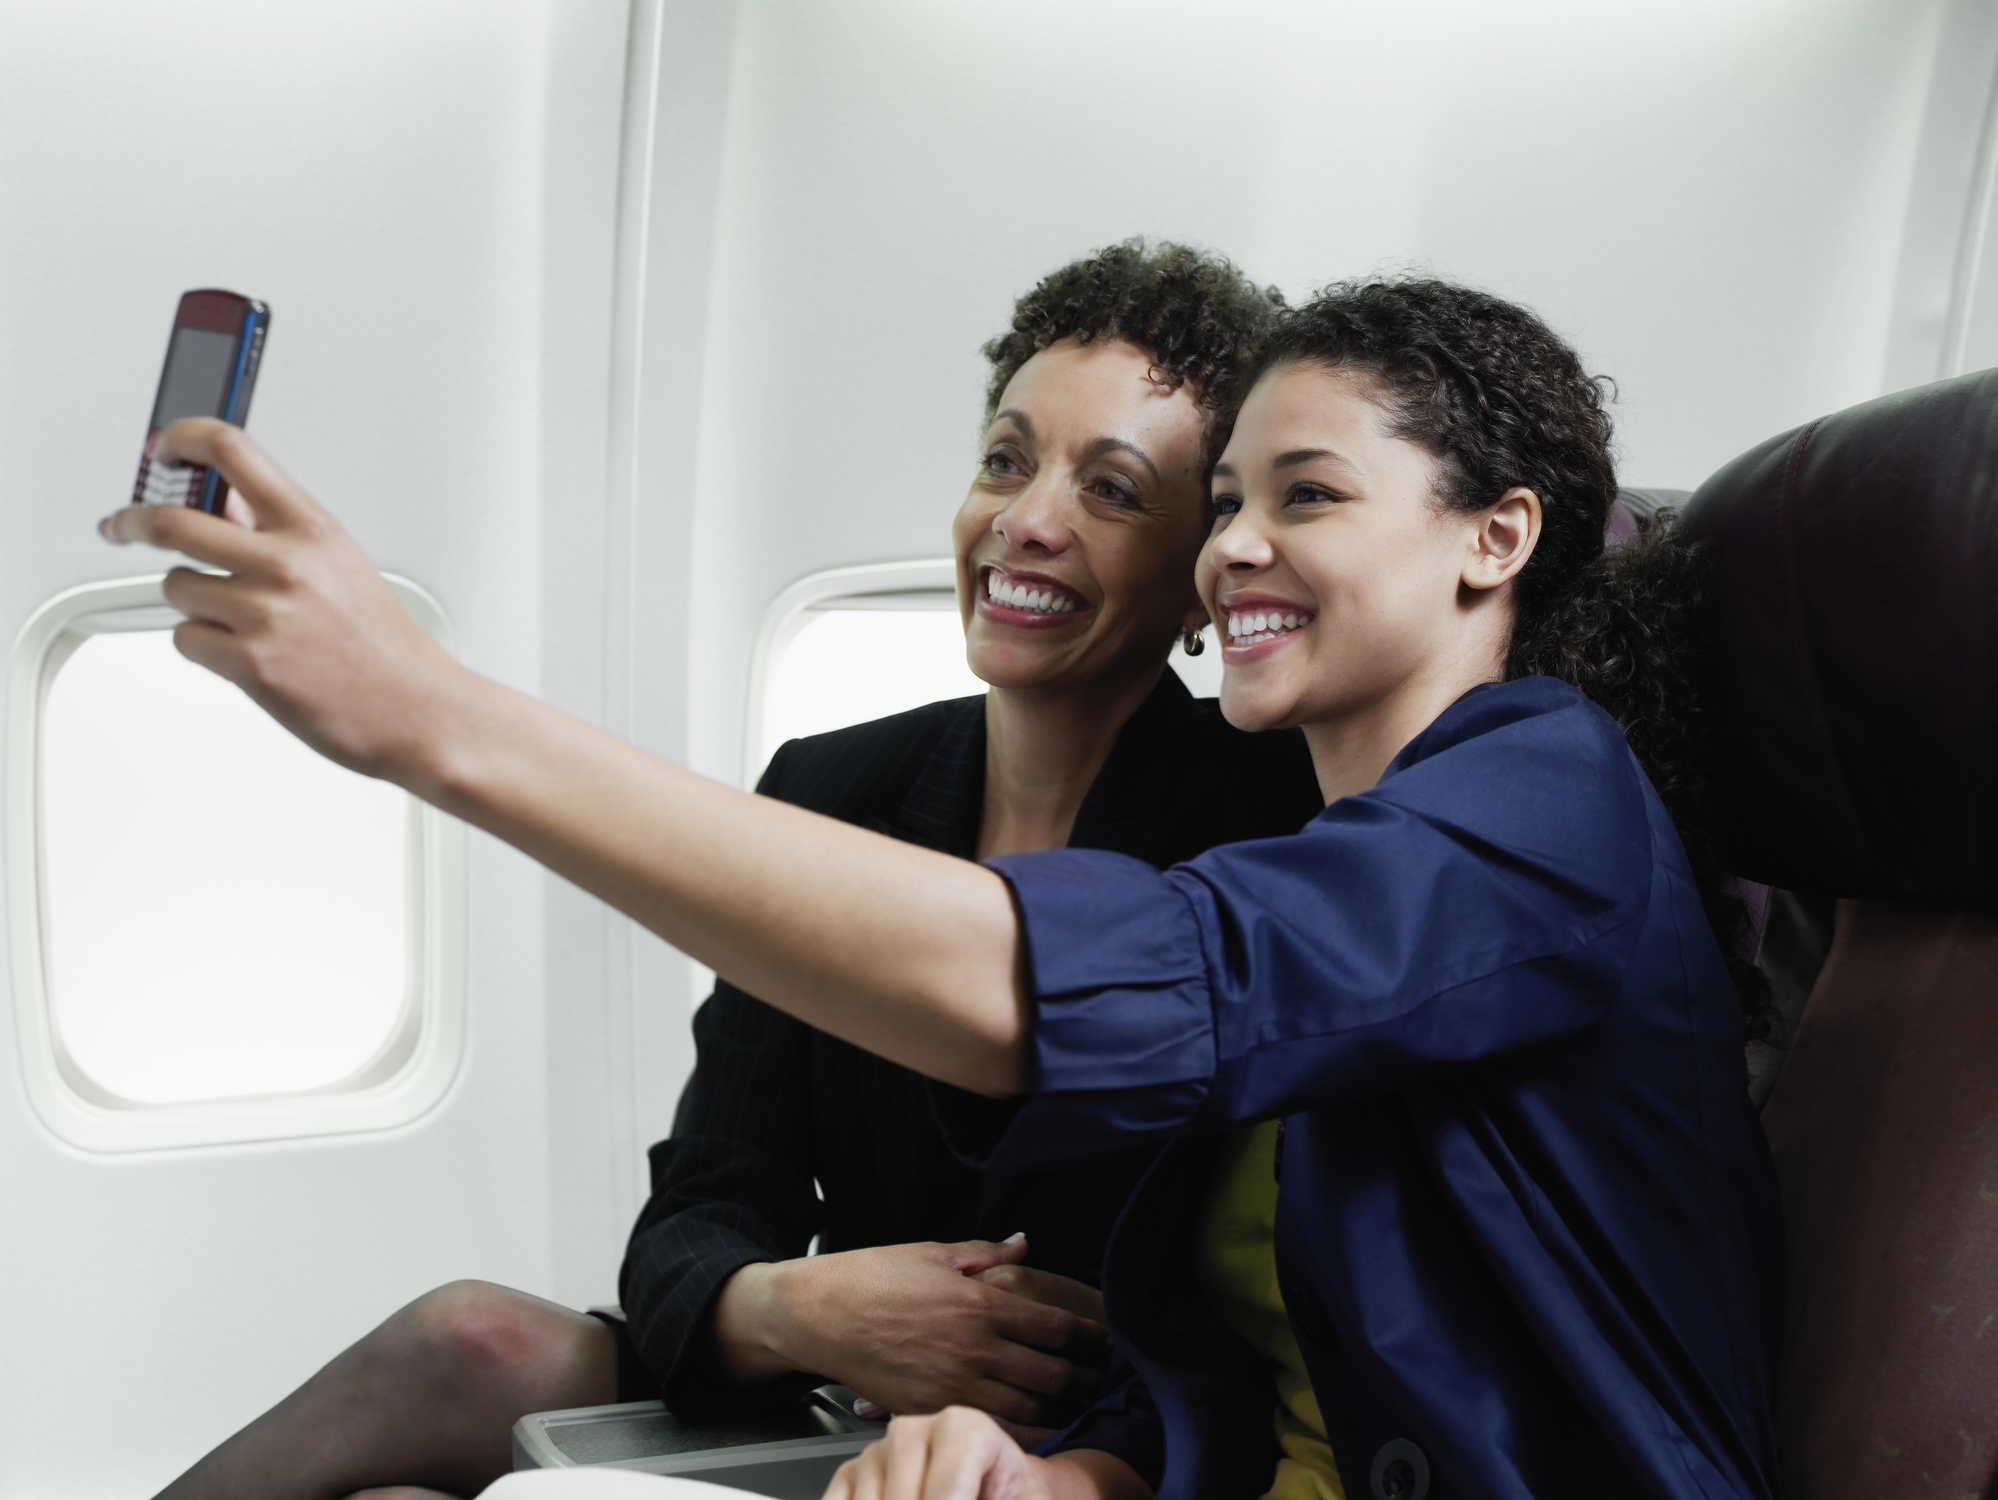 In-Flight Internet Use Soars, Predicting How Travel Is Changing During The COVID-19 Era